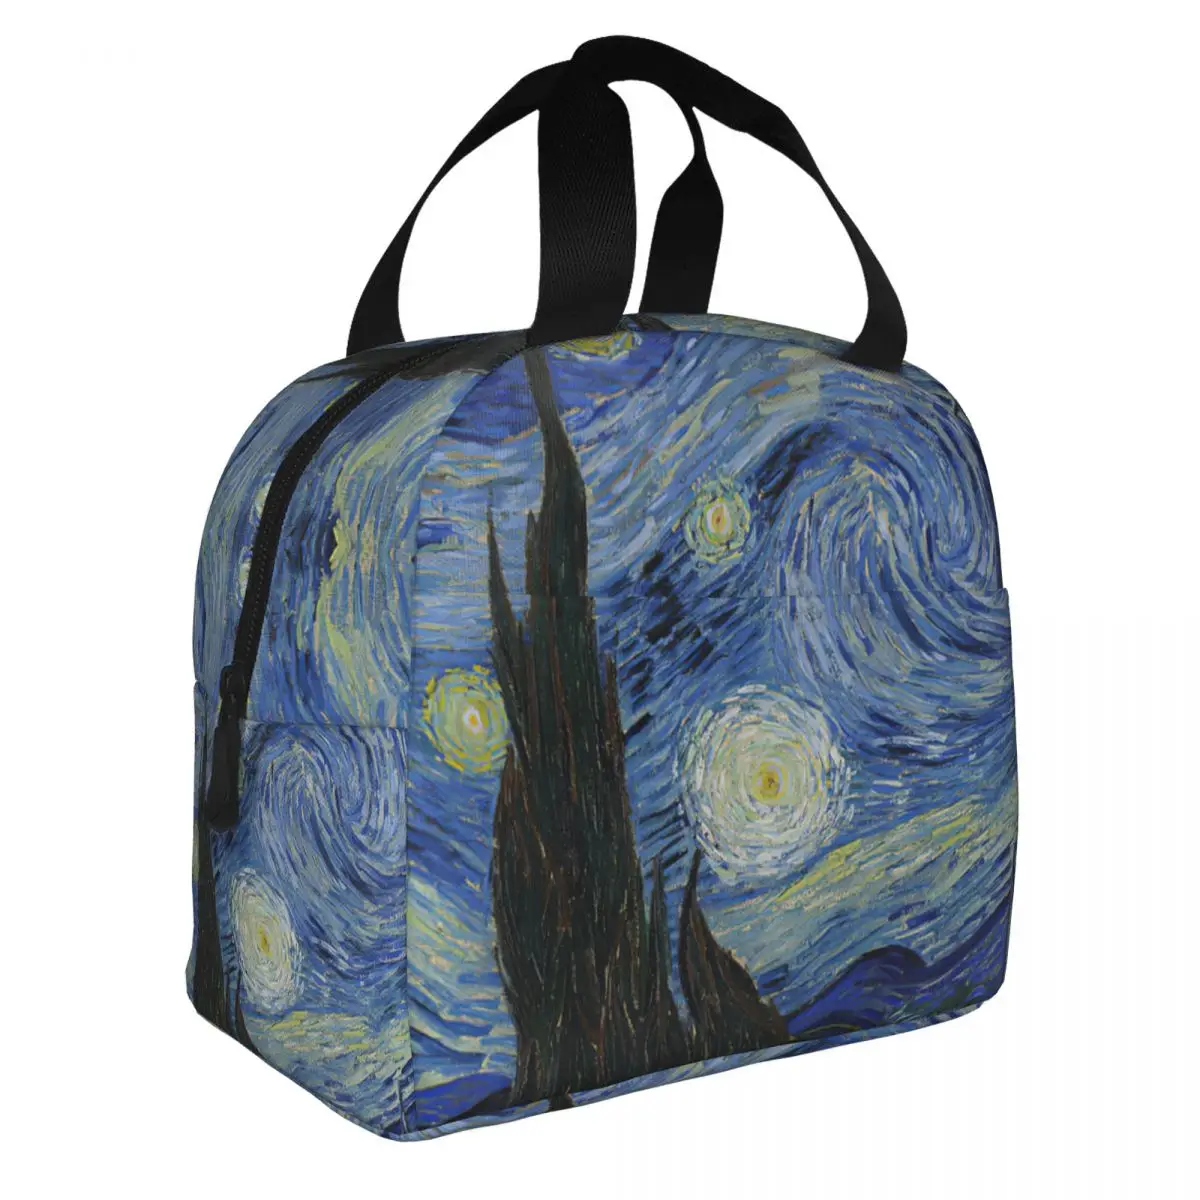 Van Gogh,The Starry Night Lunch Bento Bags Portable Aluminum Foil thickened Thermal Cloth Lunch Bag for Women Men Boy